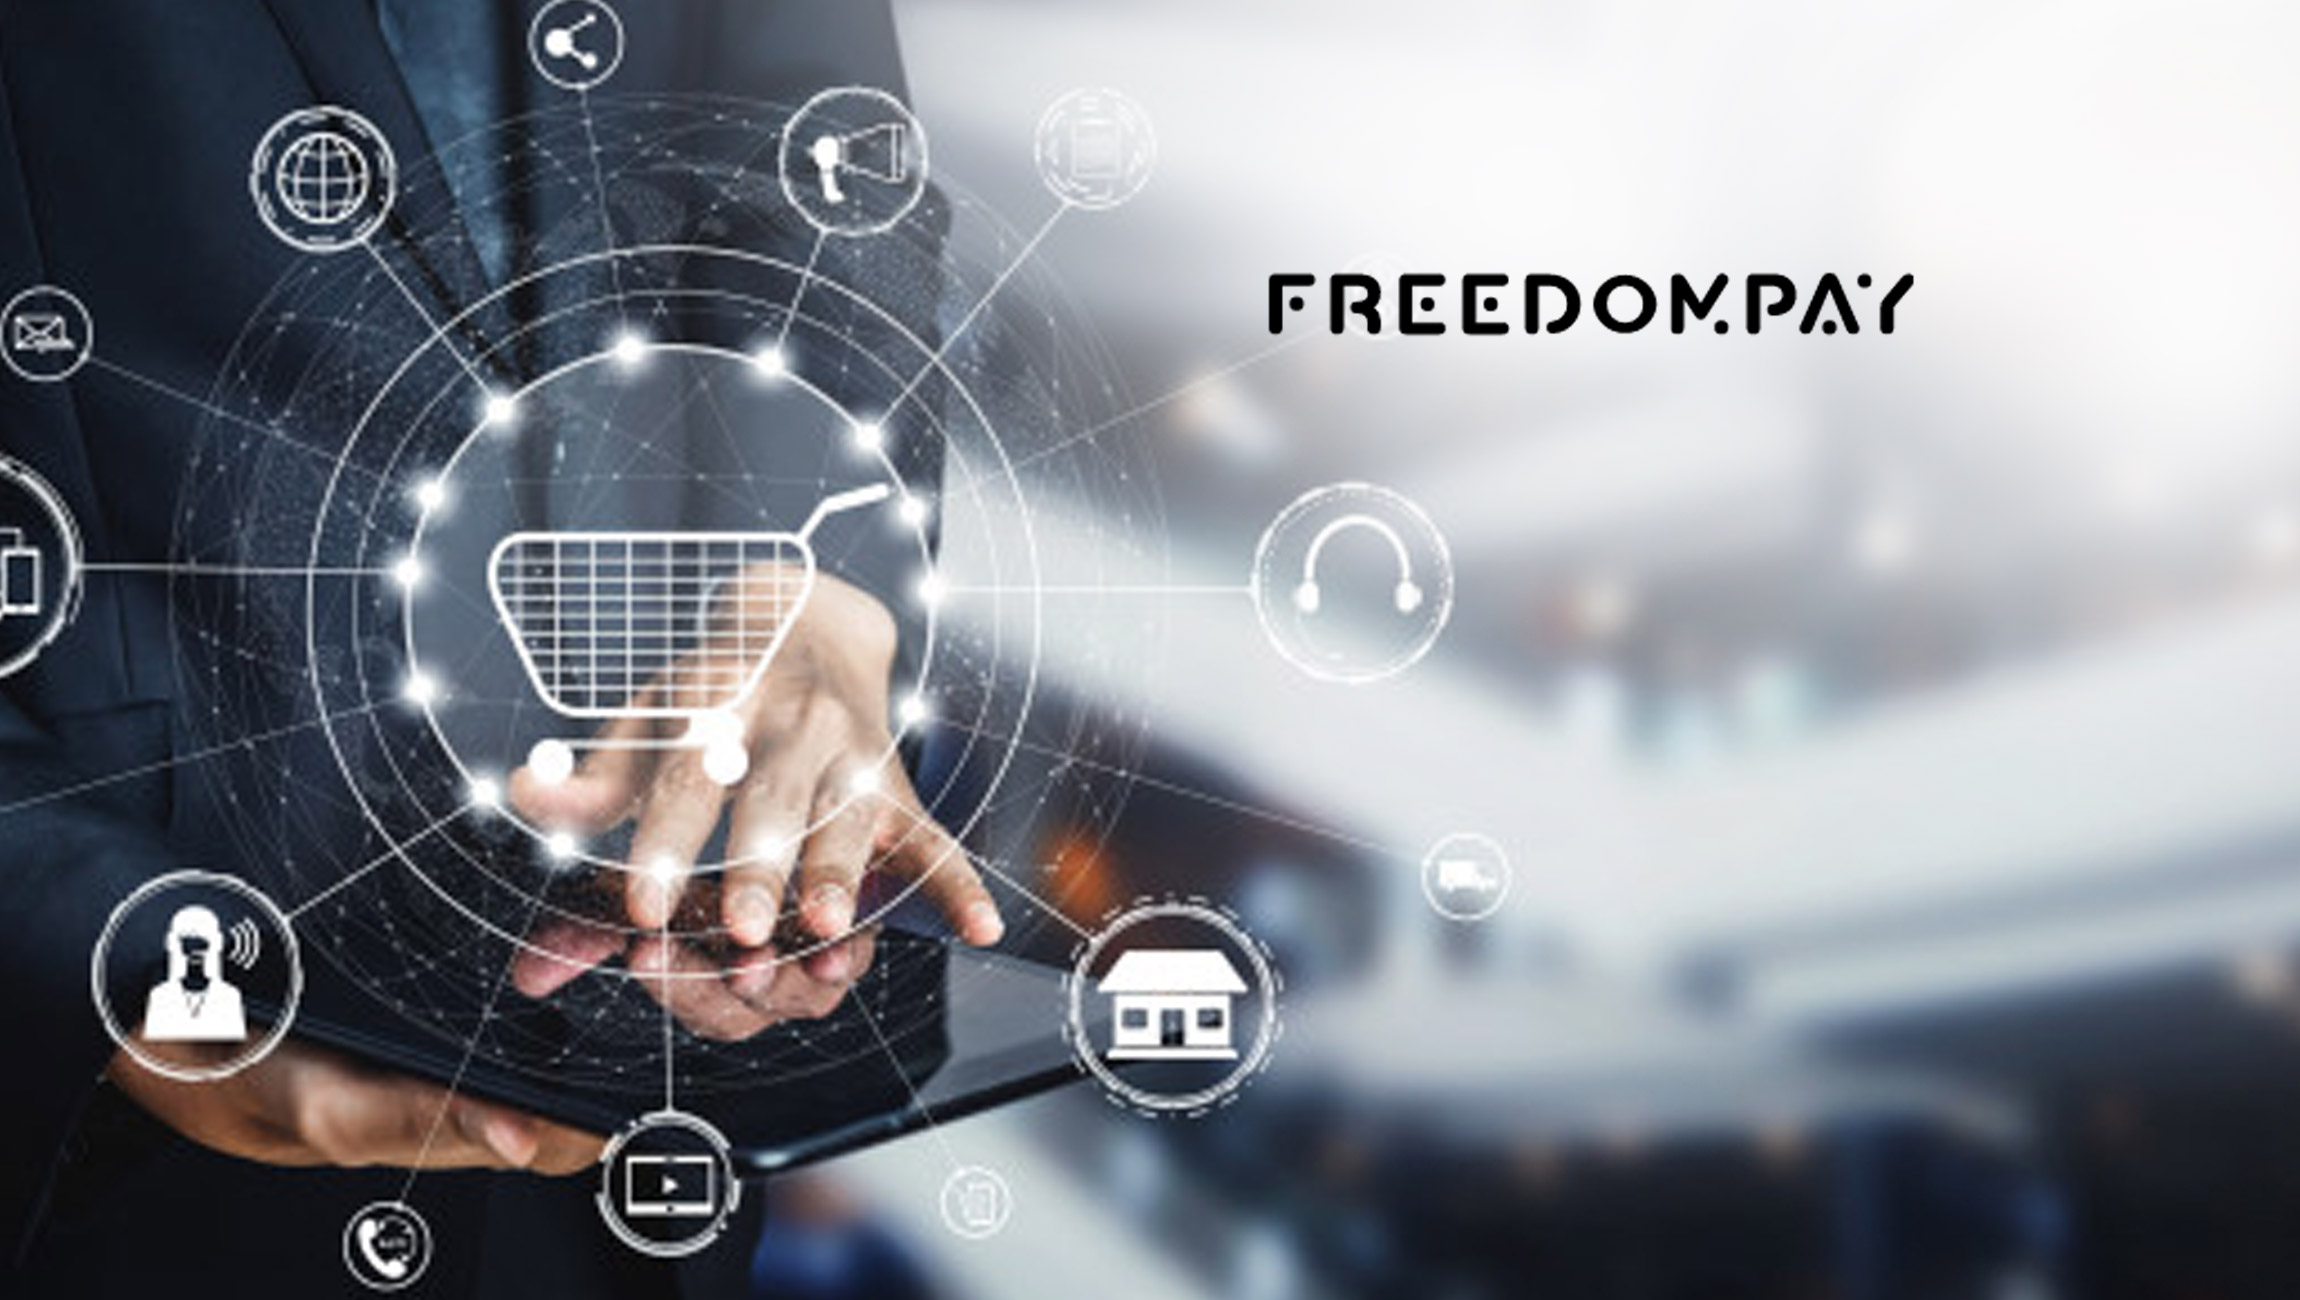 FreedomPay Brings Next Level Global Commerce to Retail Technology Show in London